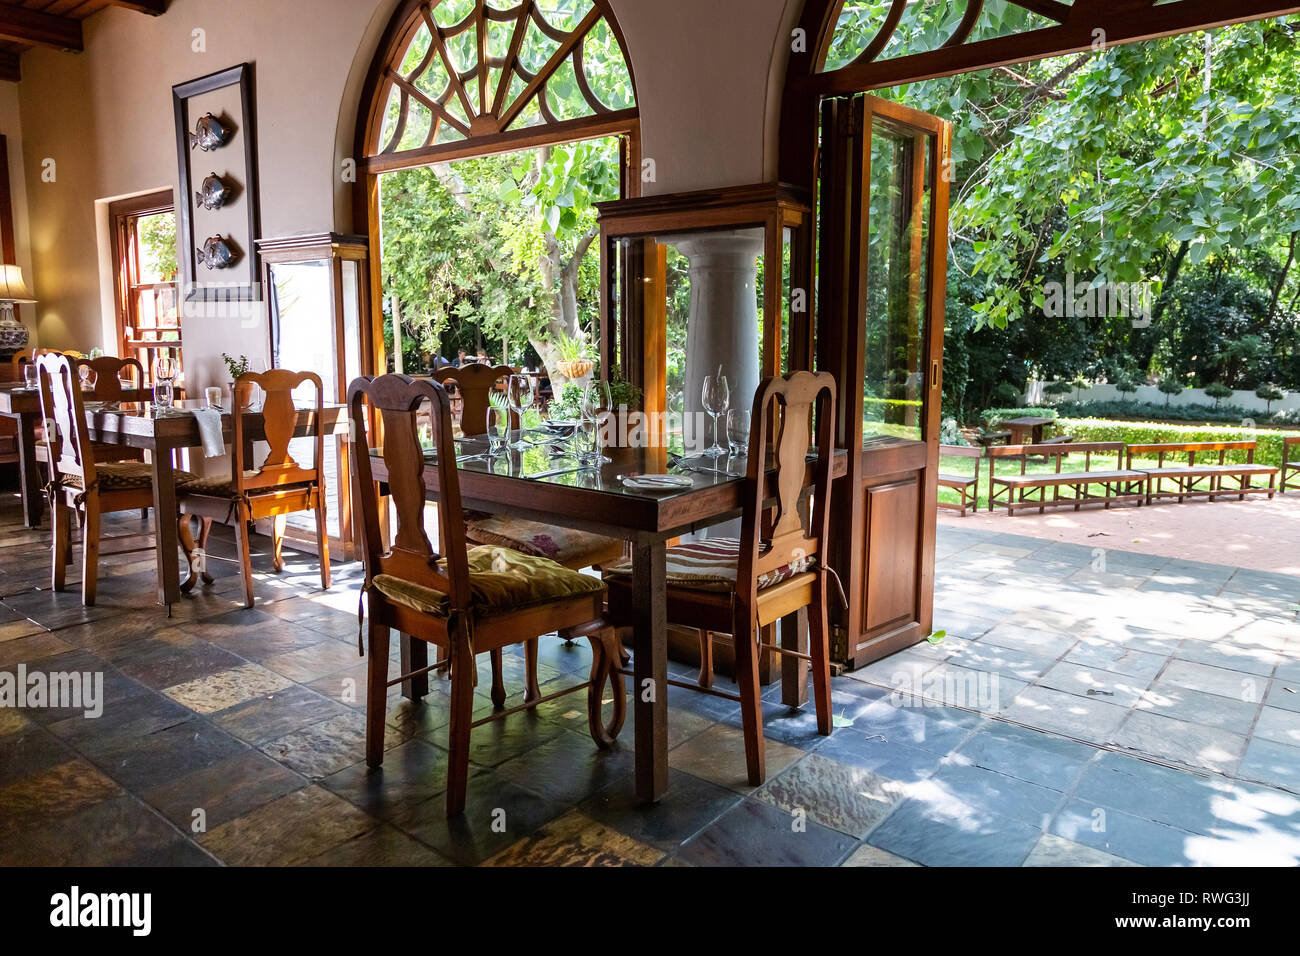 Pretoria, South Africa, 11 February - 2019: Interior view of hotel restaurant area with view to gardens outside. Stock Photo